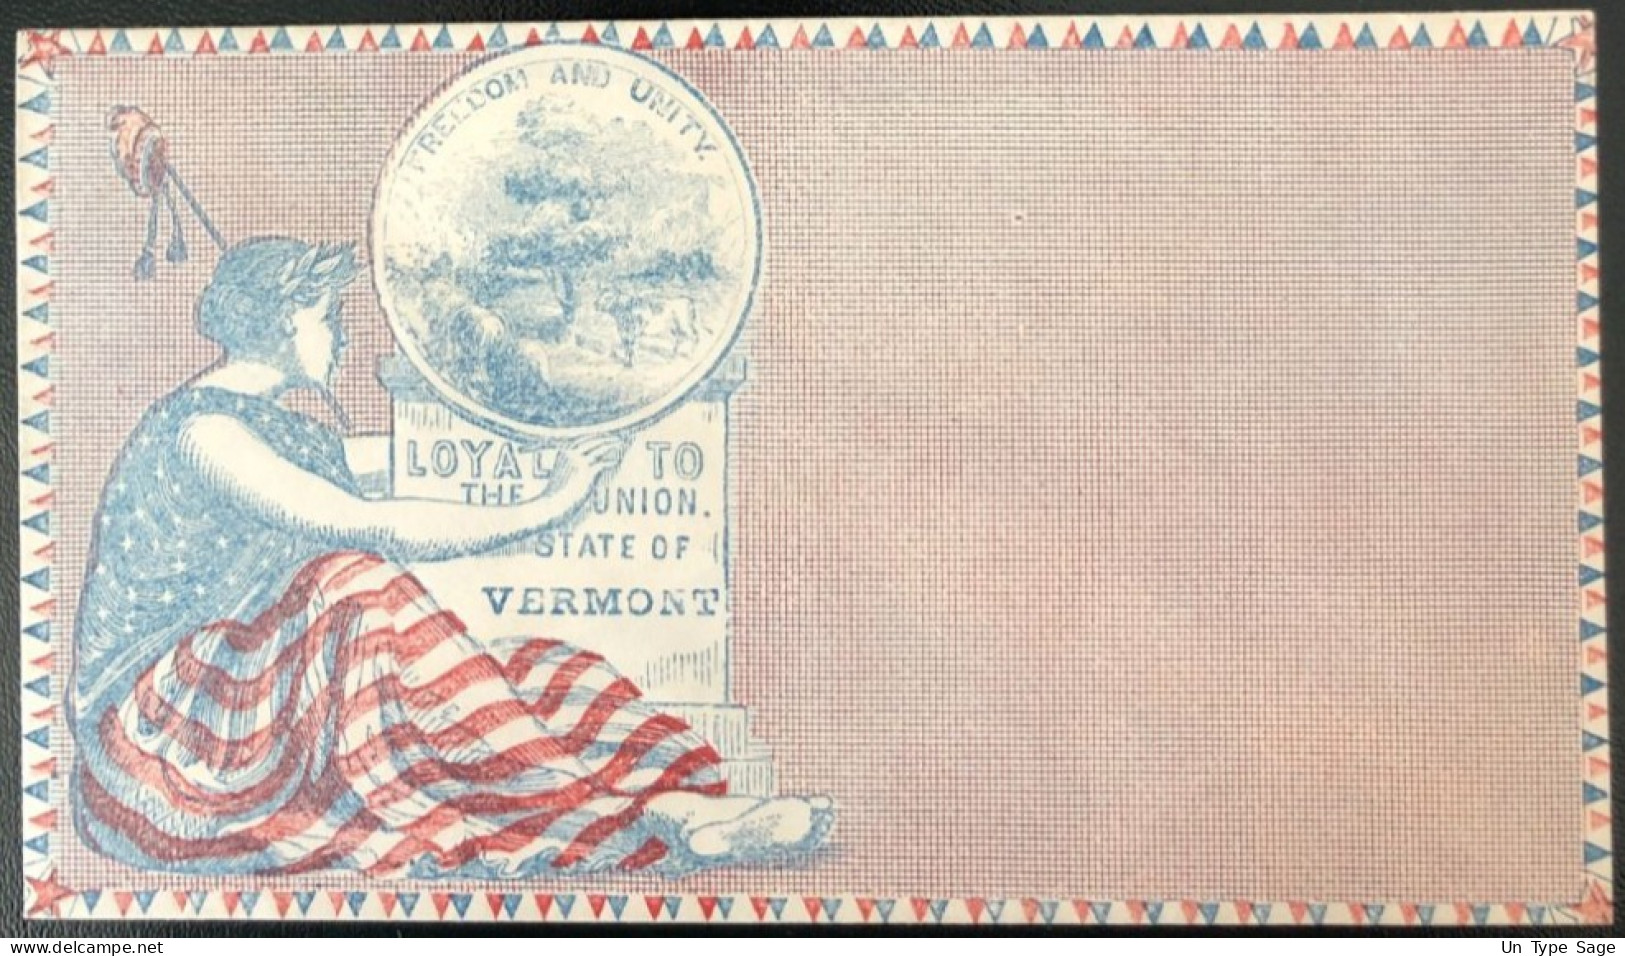 U.S.A, Civil War, Patriotic Cover - "Loyal To The Union. State Of VERMONT" - Unused - (C456) - Marcofilie